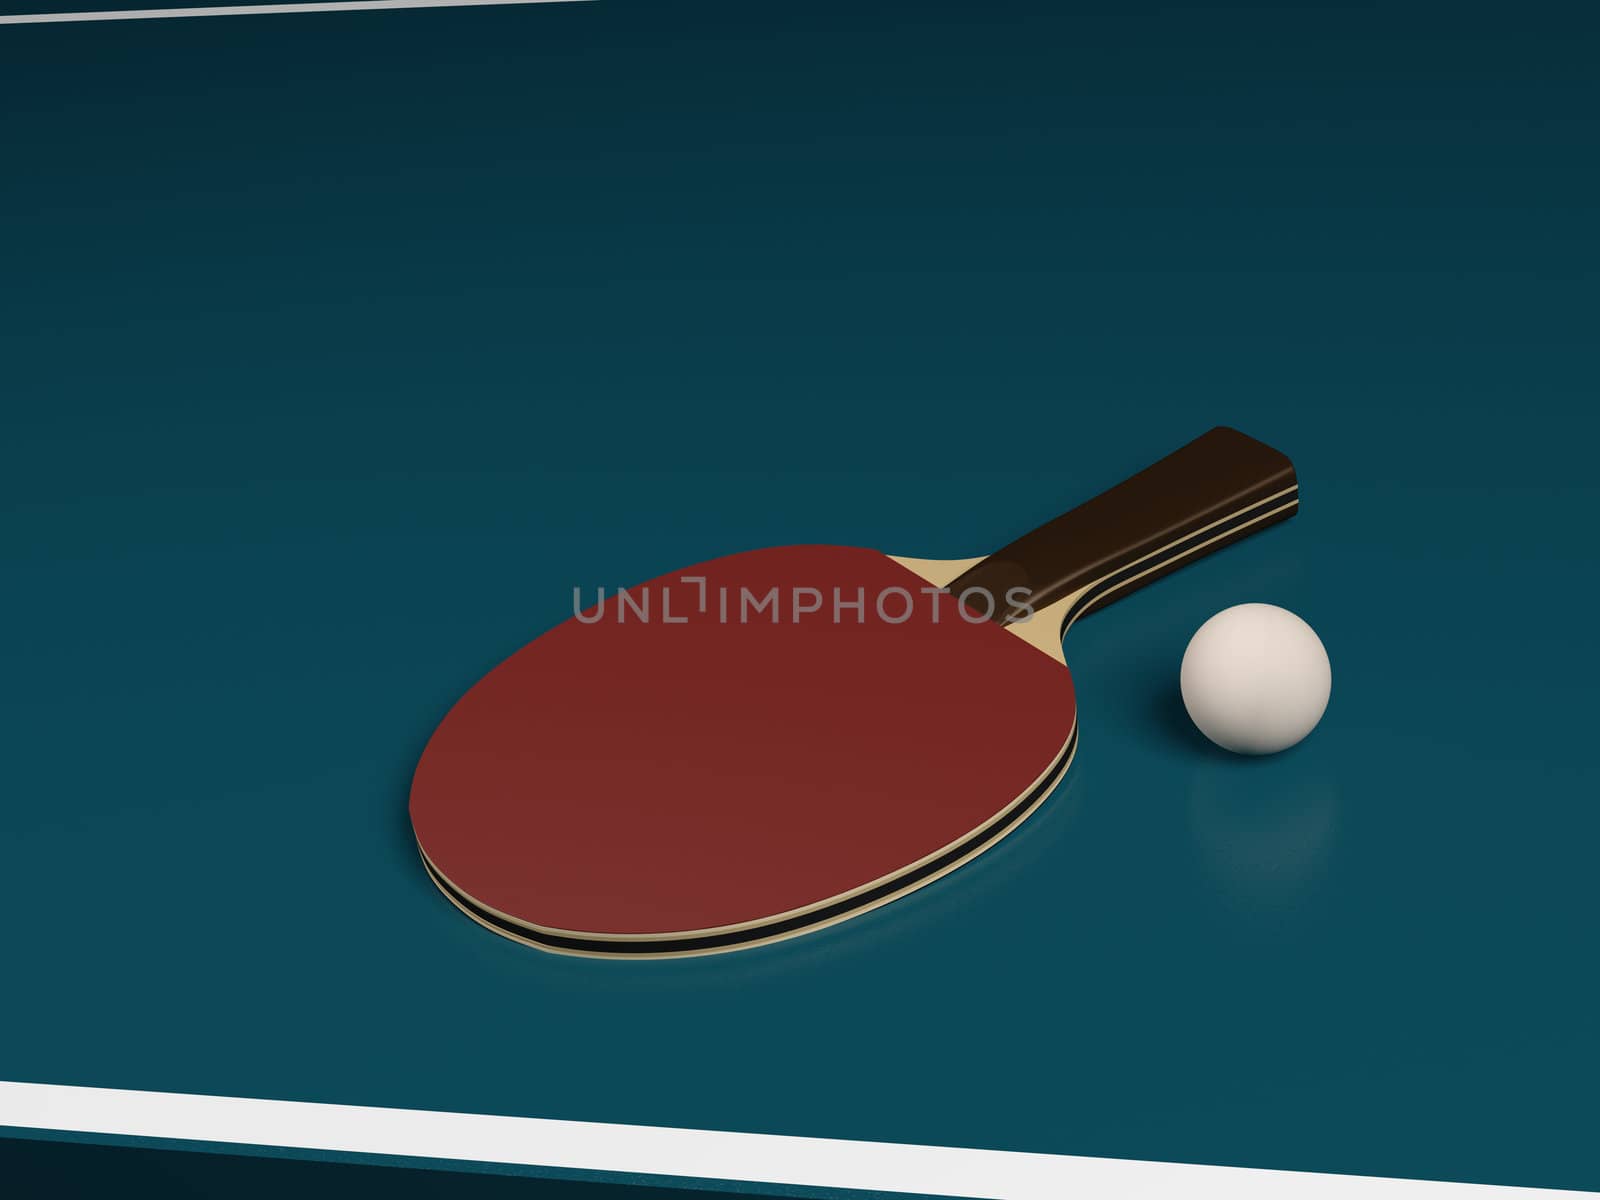 One Racket with a Ball on a Table Tennis by shkyo30